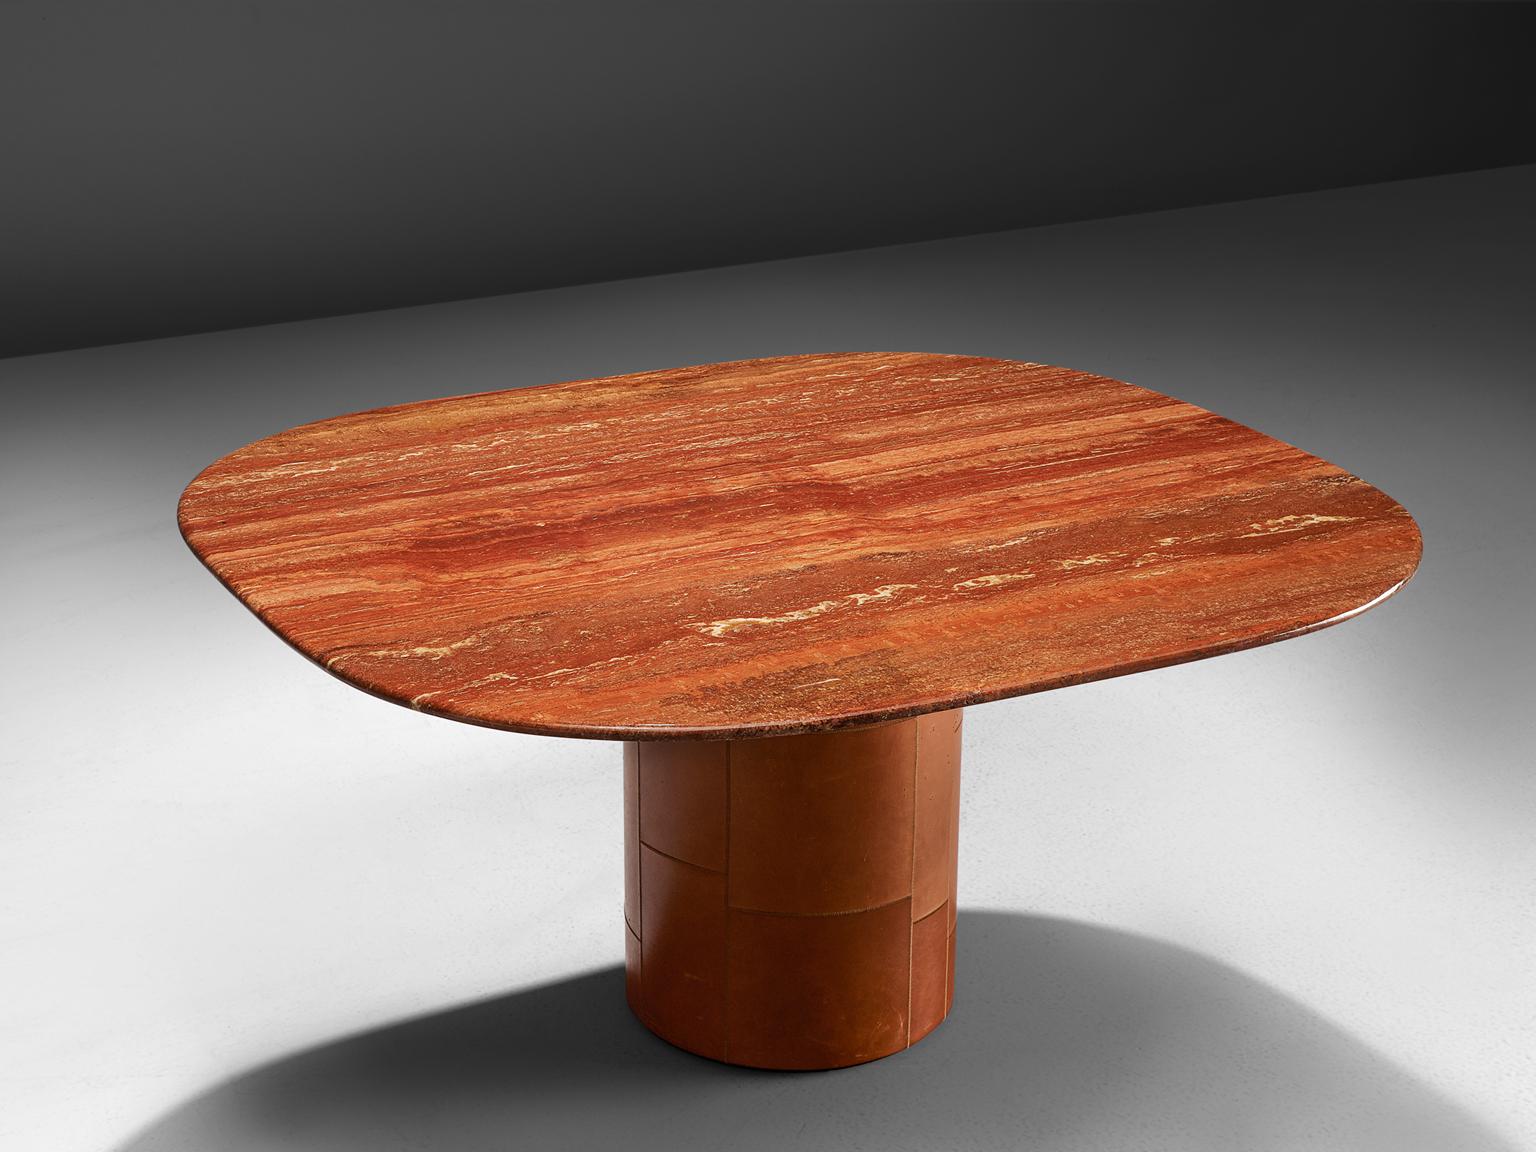 B&B Italia, dining table in red travertine and leather, Italy, 1970s.

Centre table with leather base and top of red travertine. The combination of material, leather and travertine, from a strong contrast. The red to orange colored travertine